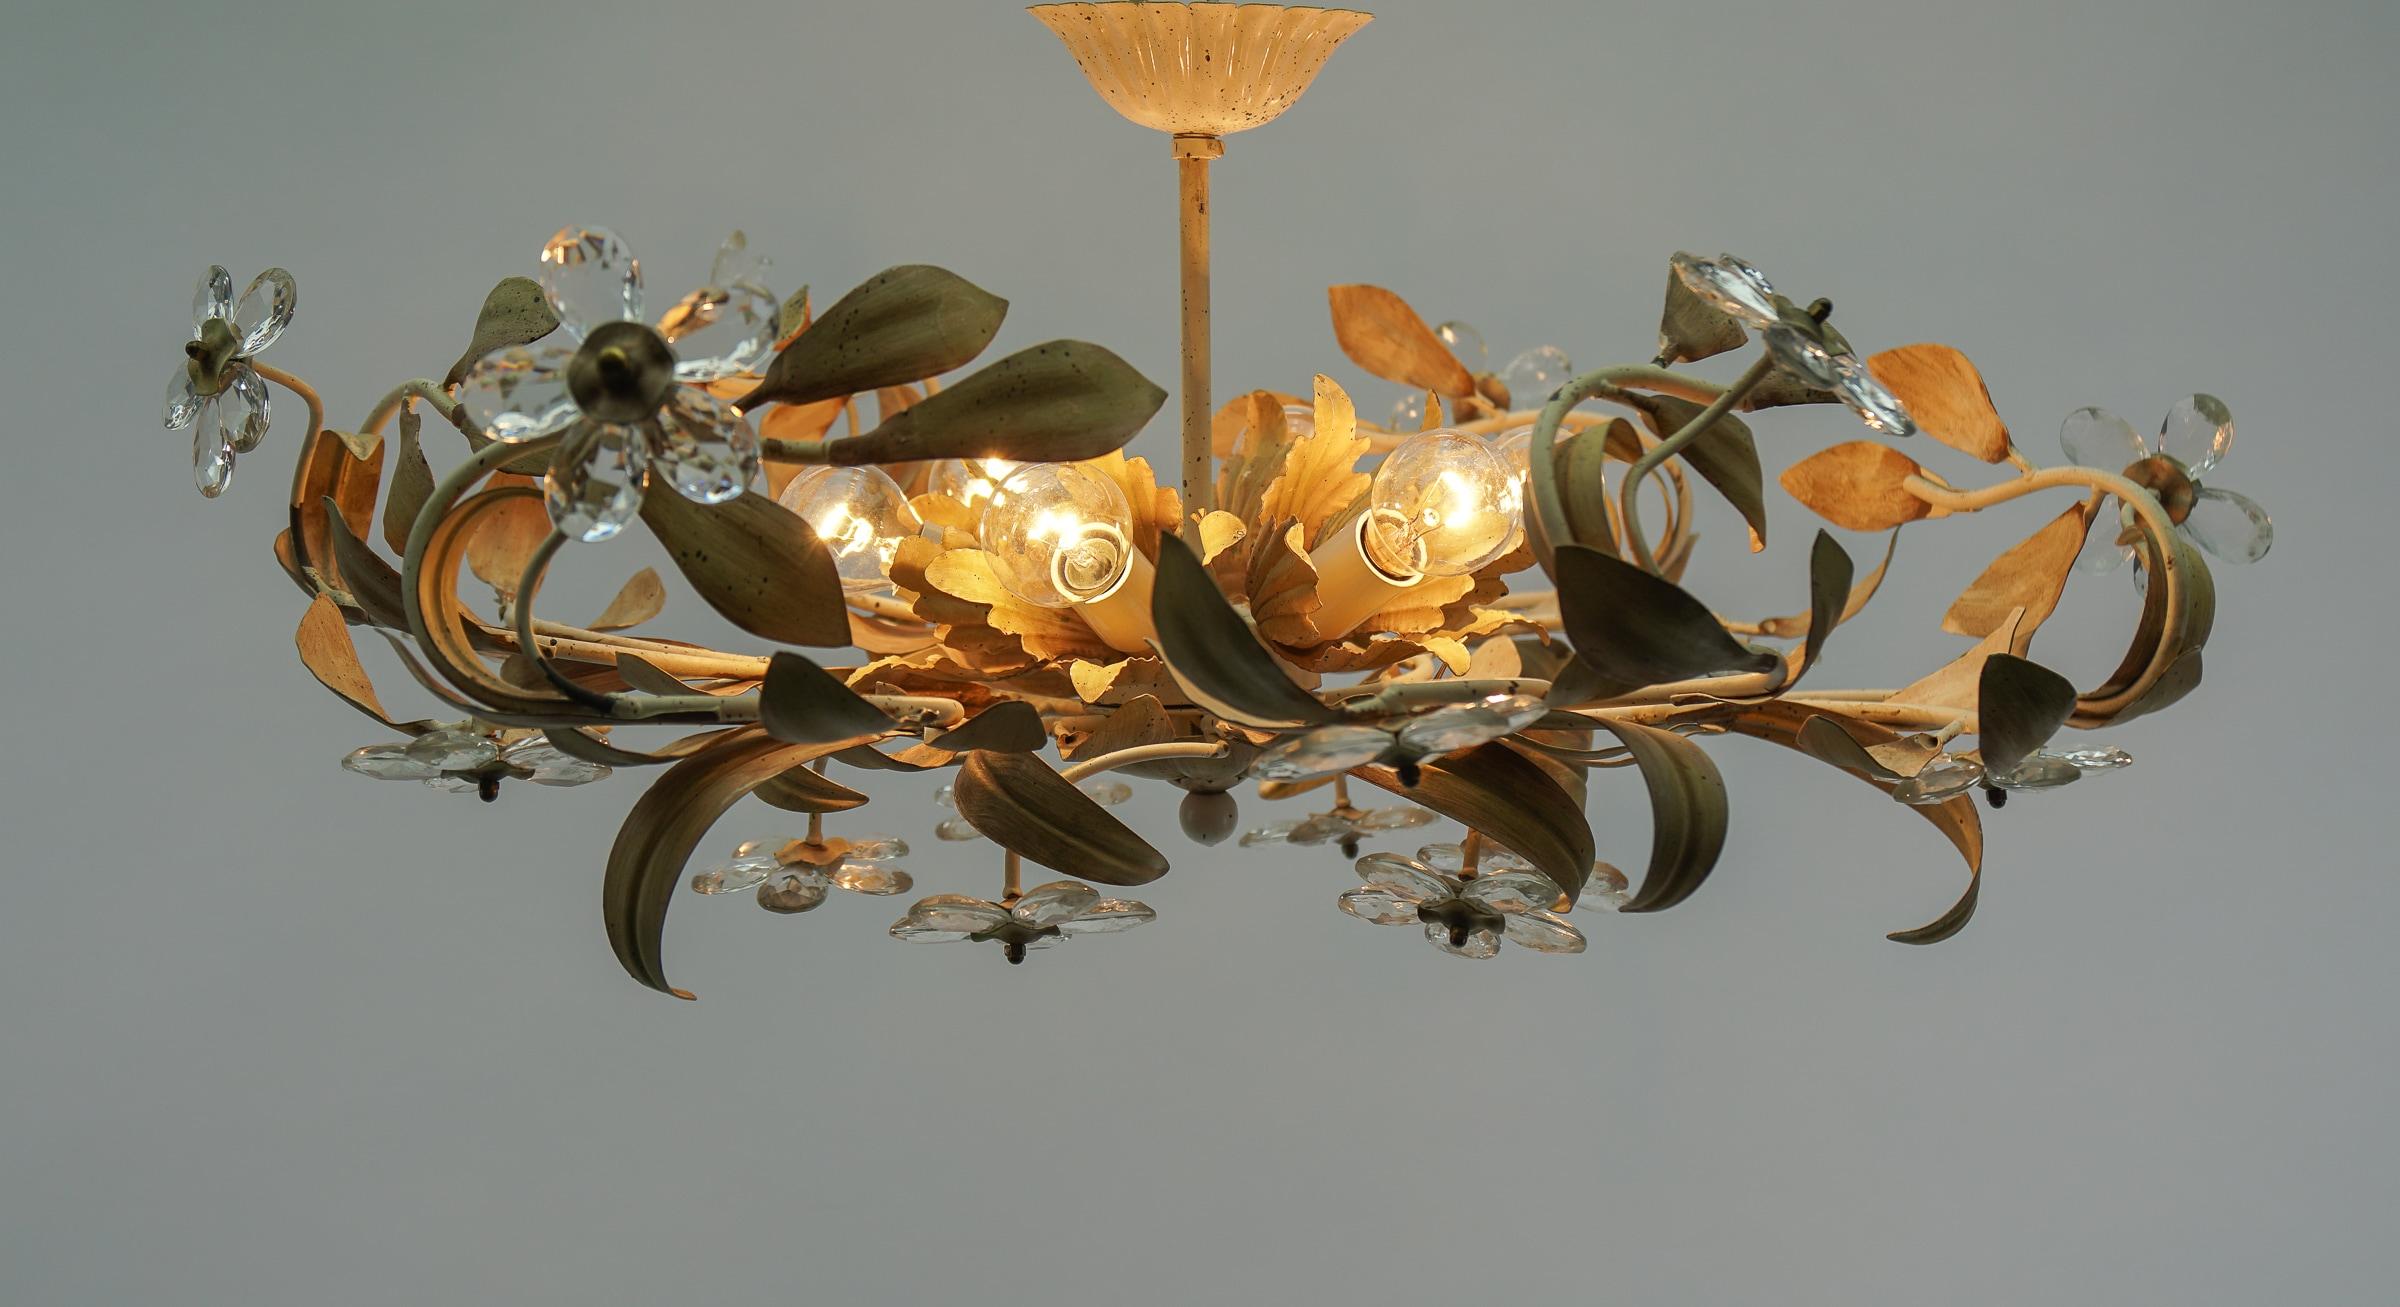 Mid-Century Modern Italian Crystal Glass and Metal Florentine Ceiling Lamp by Banci Firenze, 1960s For Sale